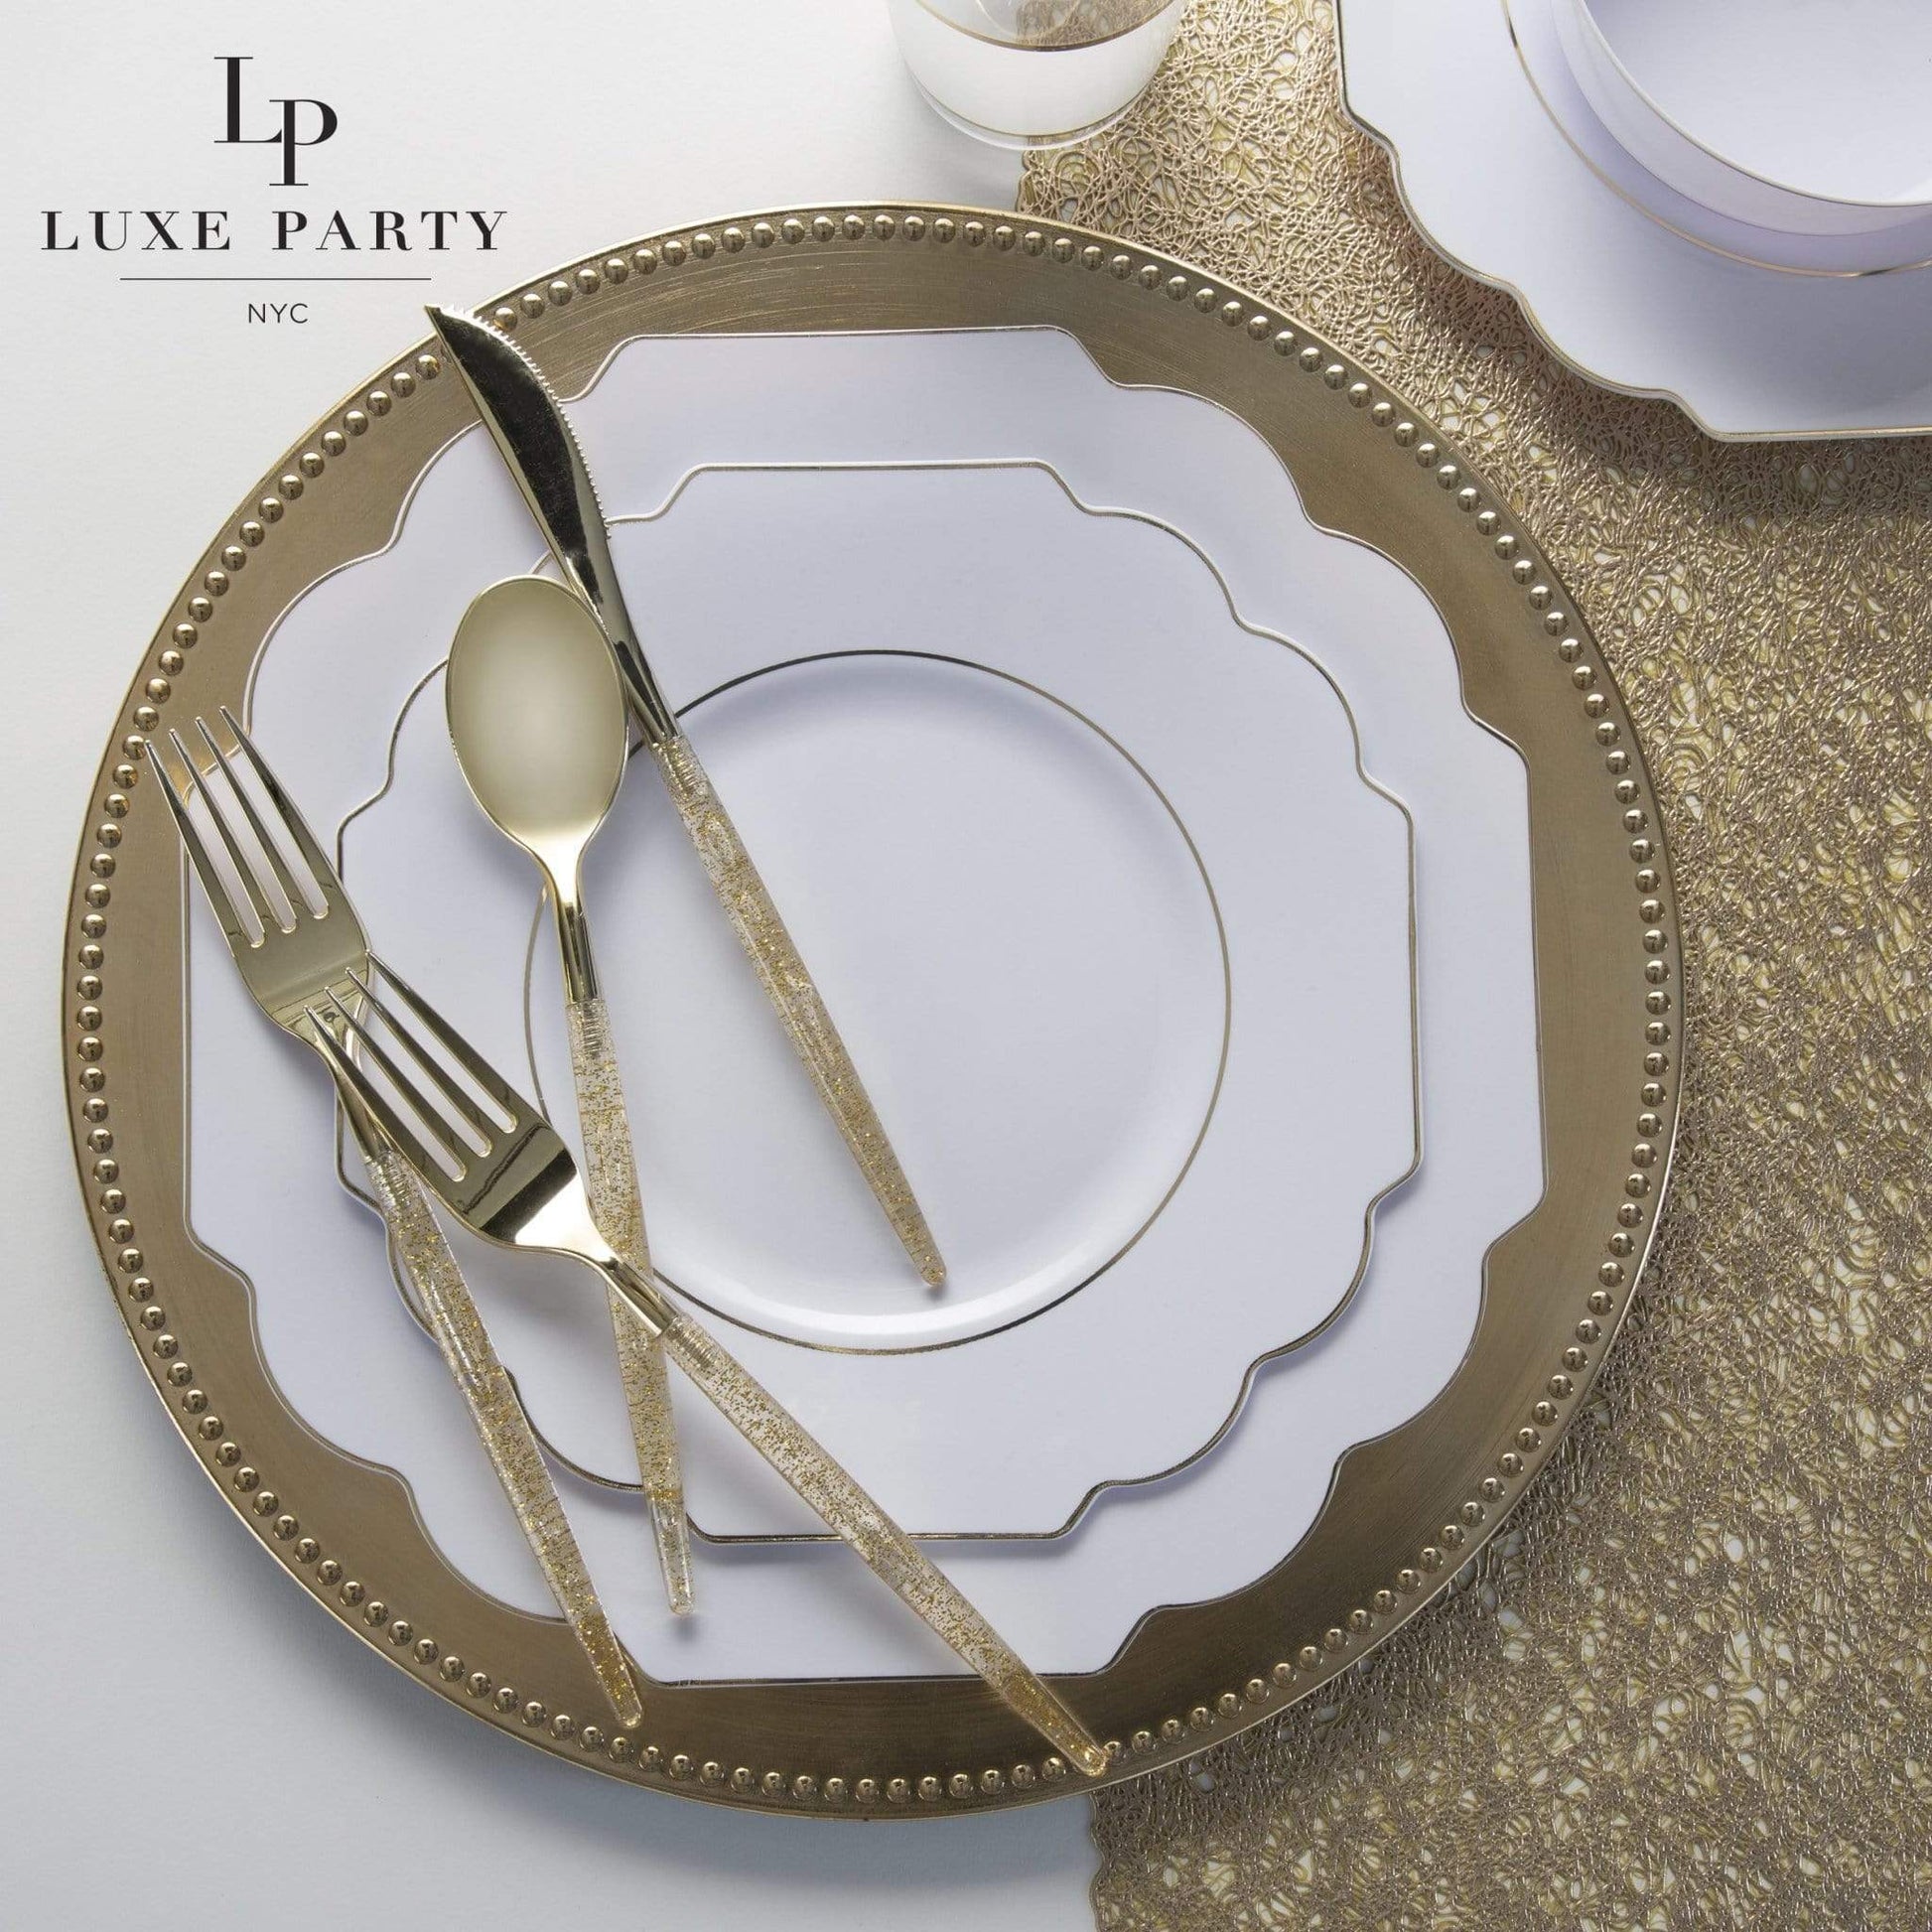 white and gold themed table setting